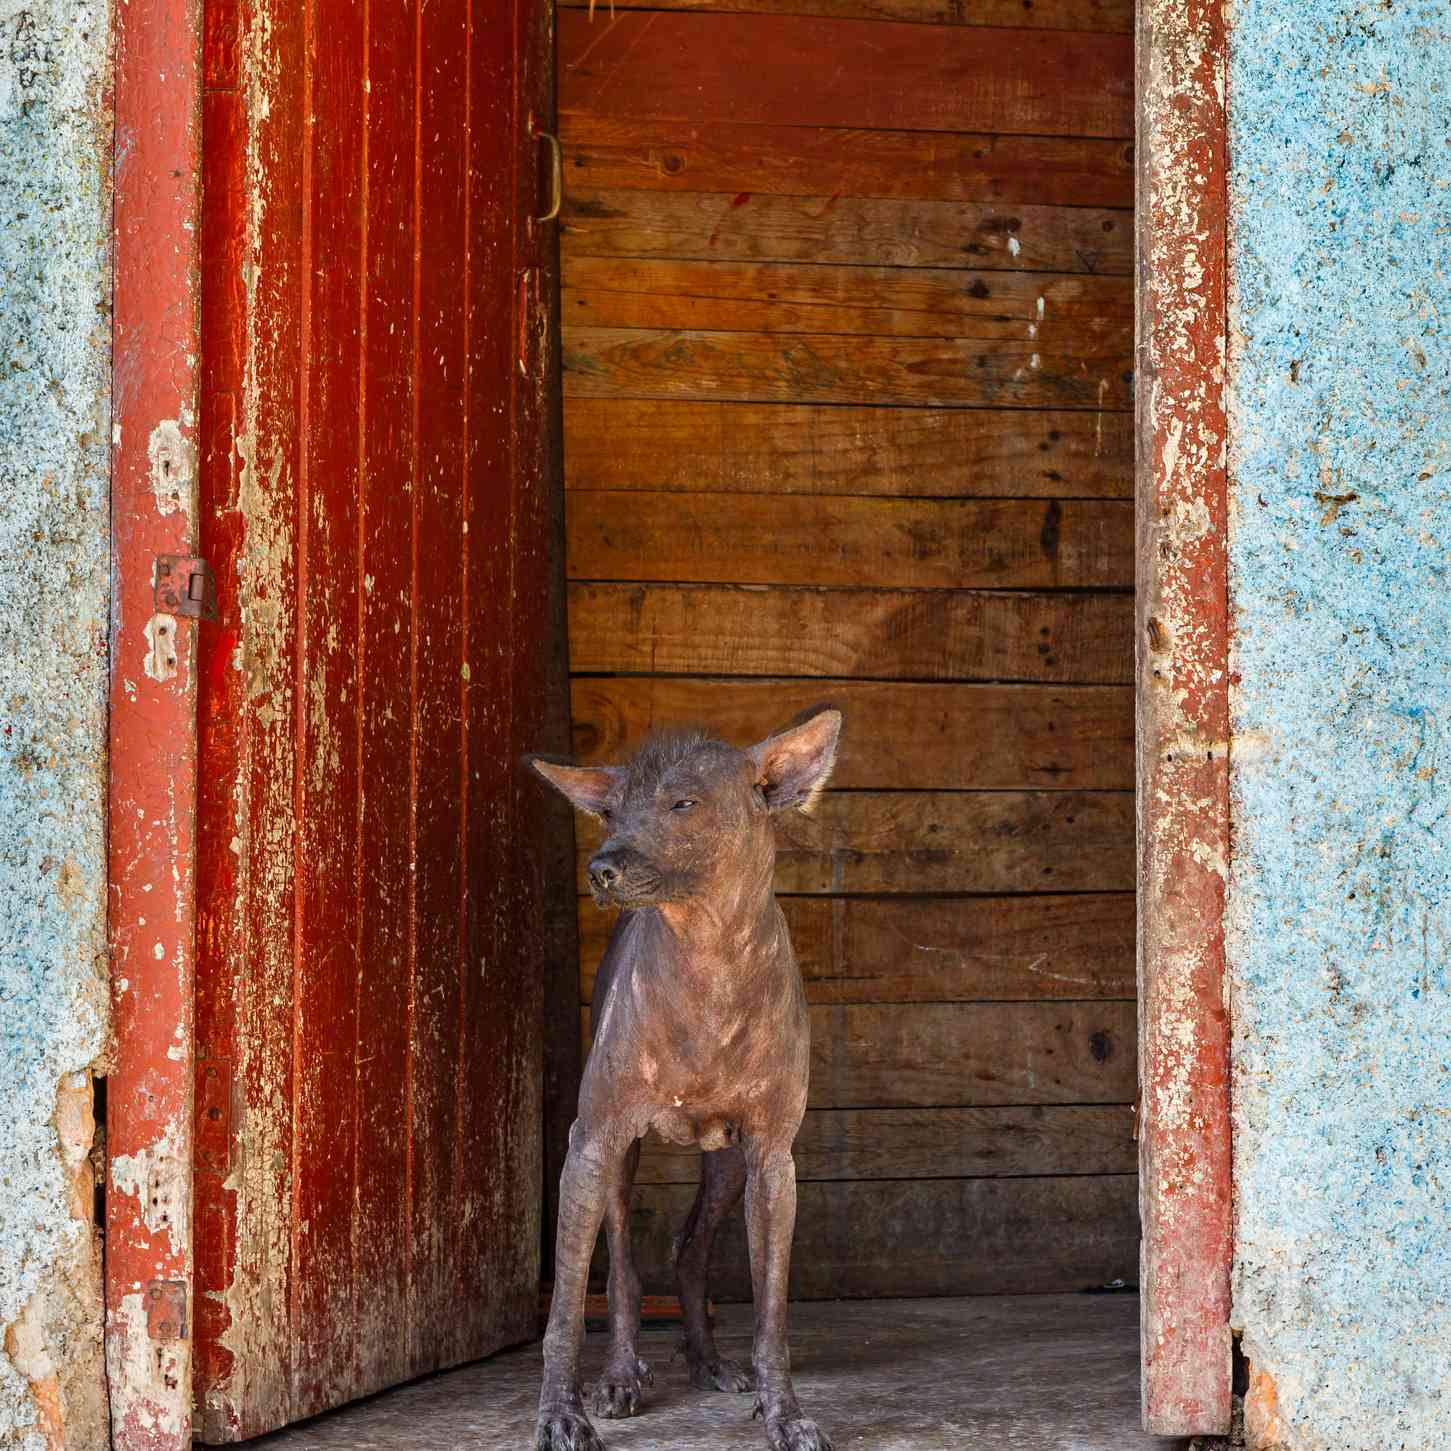 A small hairless dog standing on a cement step in front of a wooden door.